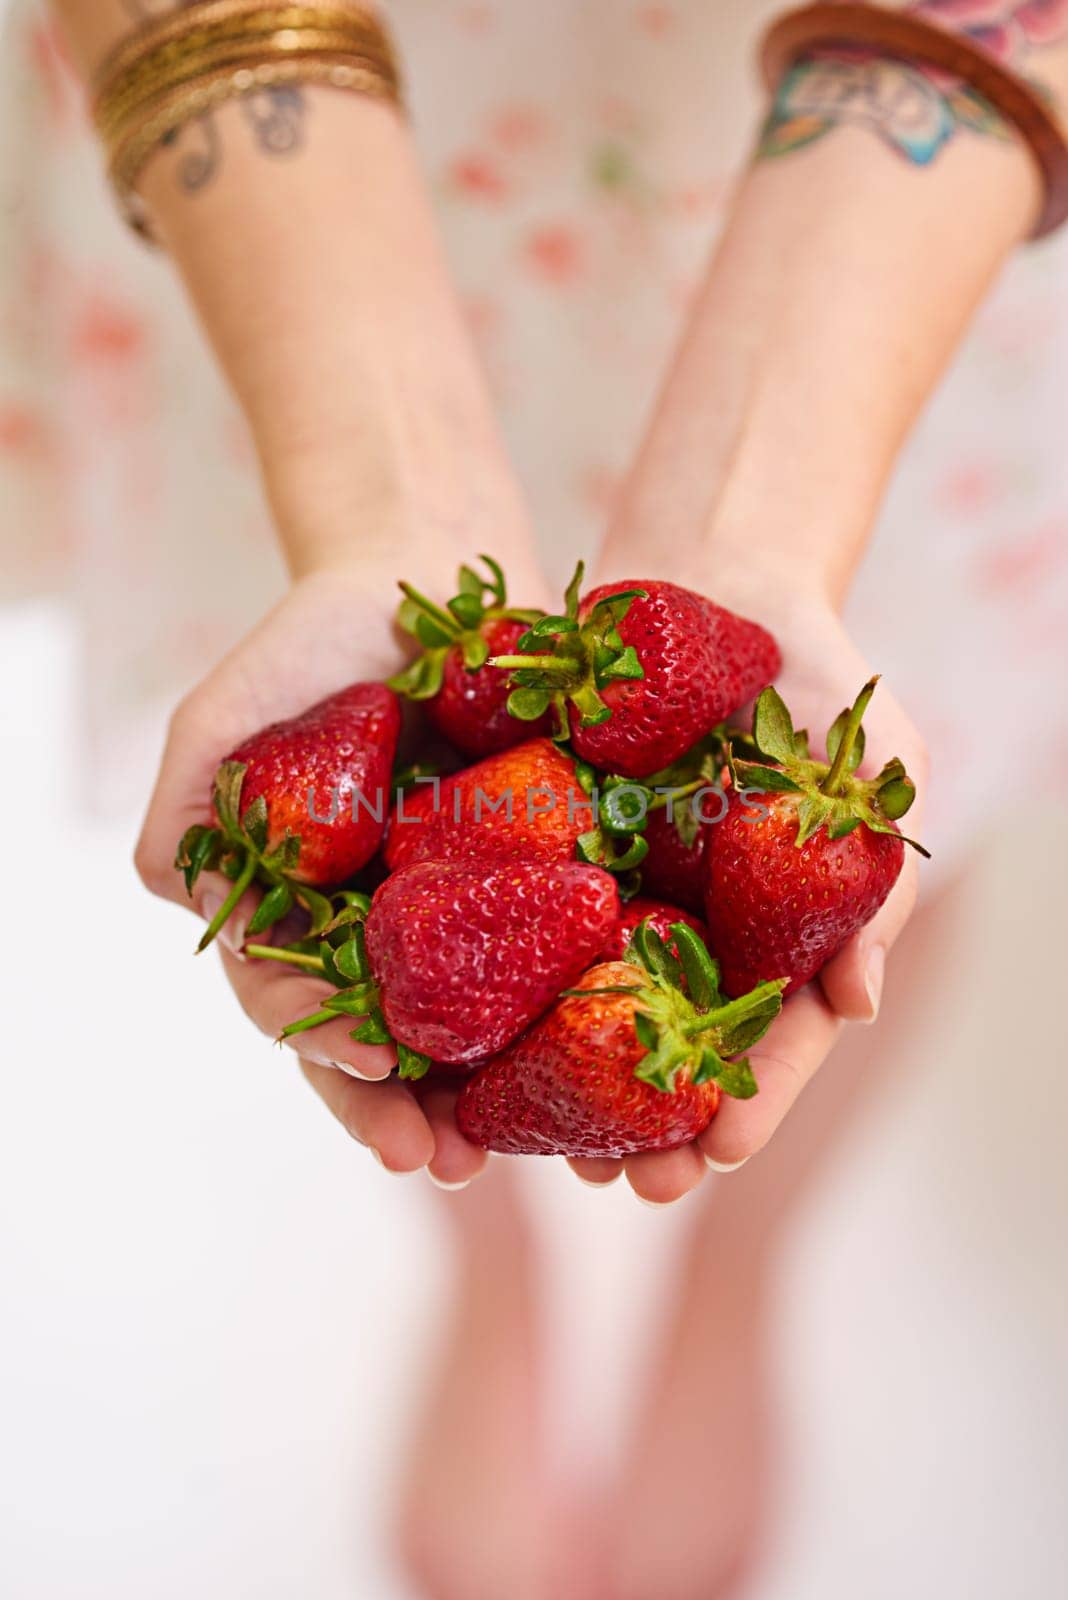 Healthy, strawberry and woman hands with fruit as vegan for protein, organic and balanced diet by eating nutritious snacks. Person, fresh and natural ingredients with vitamin from farming plantation by YuriArcurs